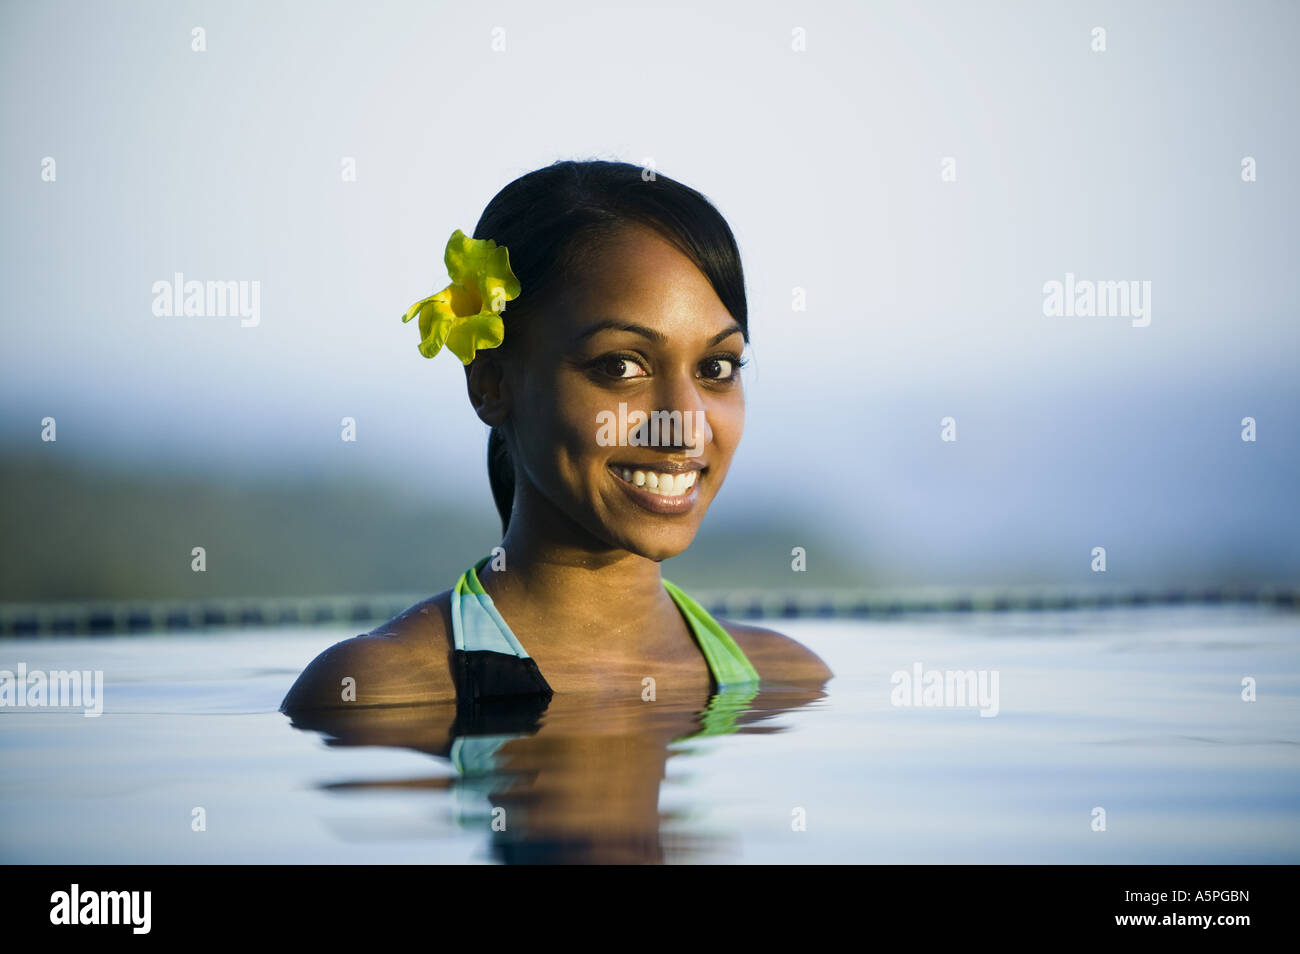 Portrait of a young woman in water Stock Photo